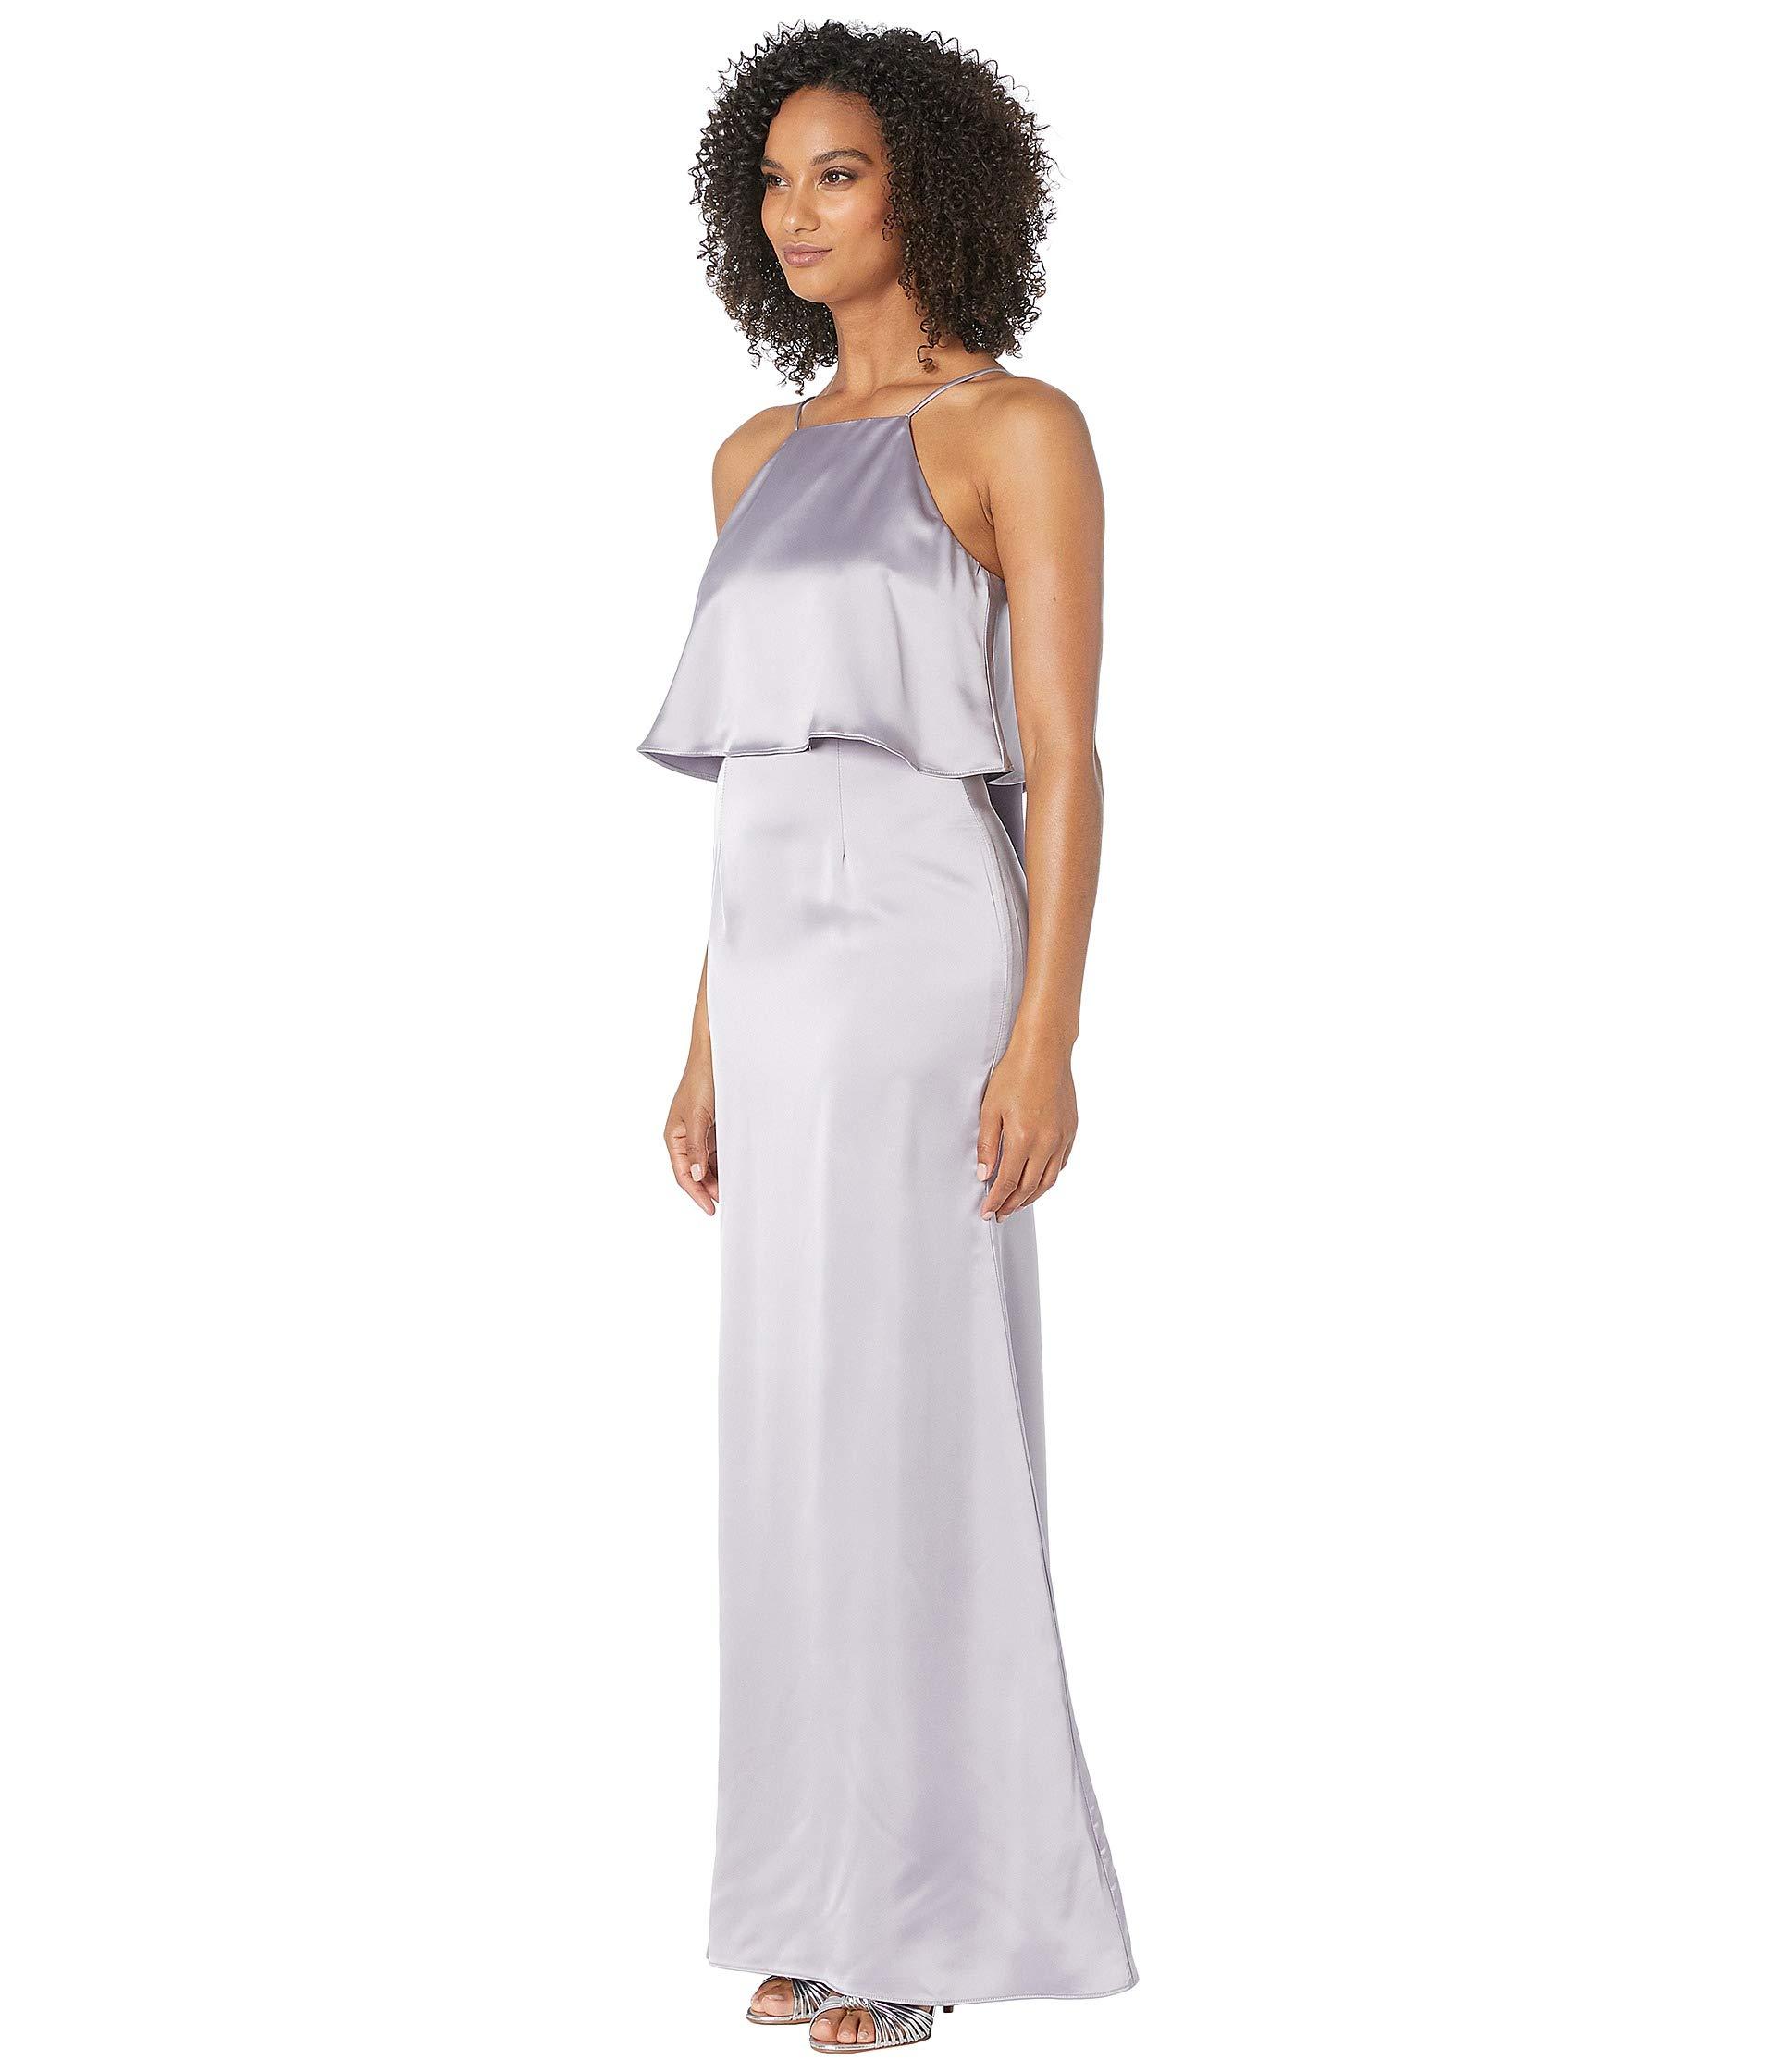 Adrianna Papell Satin Halter Popover Evening Gown in Gray - Lyst